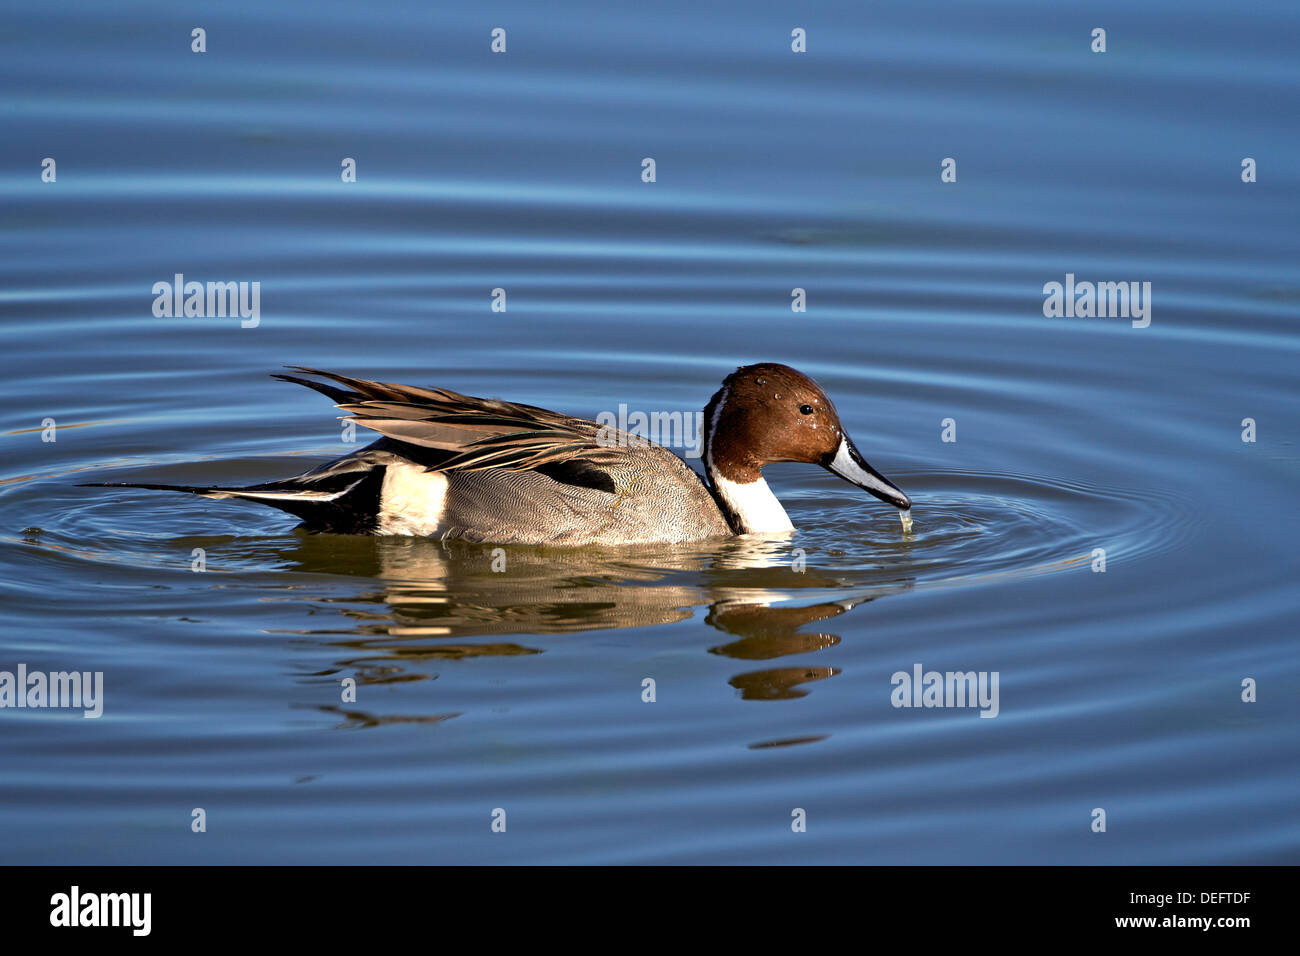 Northern pintail (Anas acuta) drake, Bosque del Apache National Wildlife Refuge, New Mexico, United States of America Stock Photo